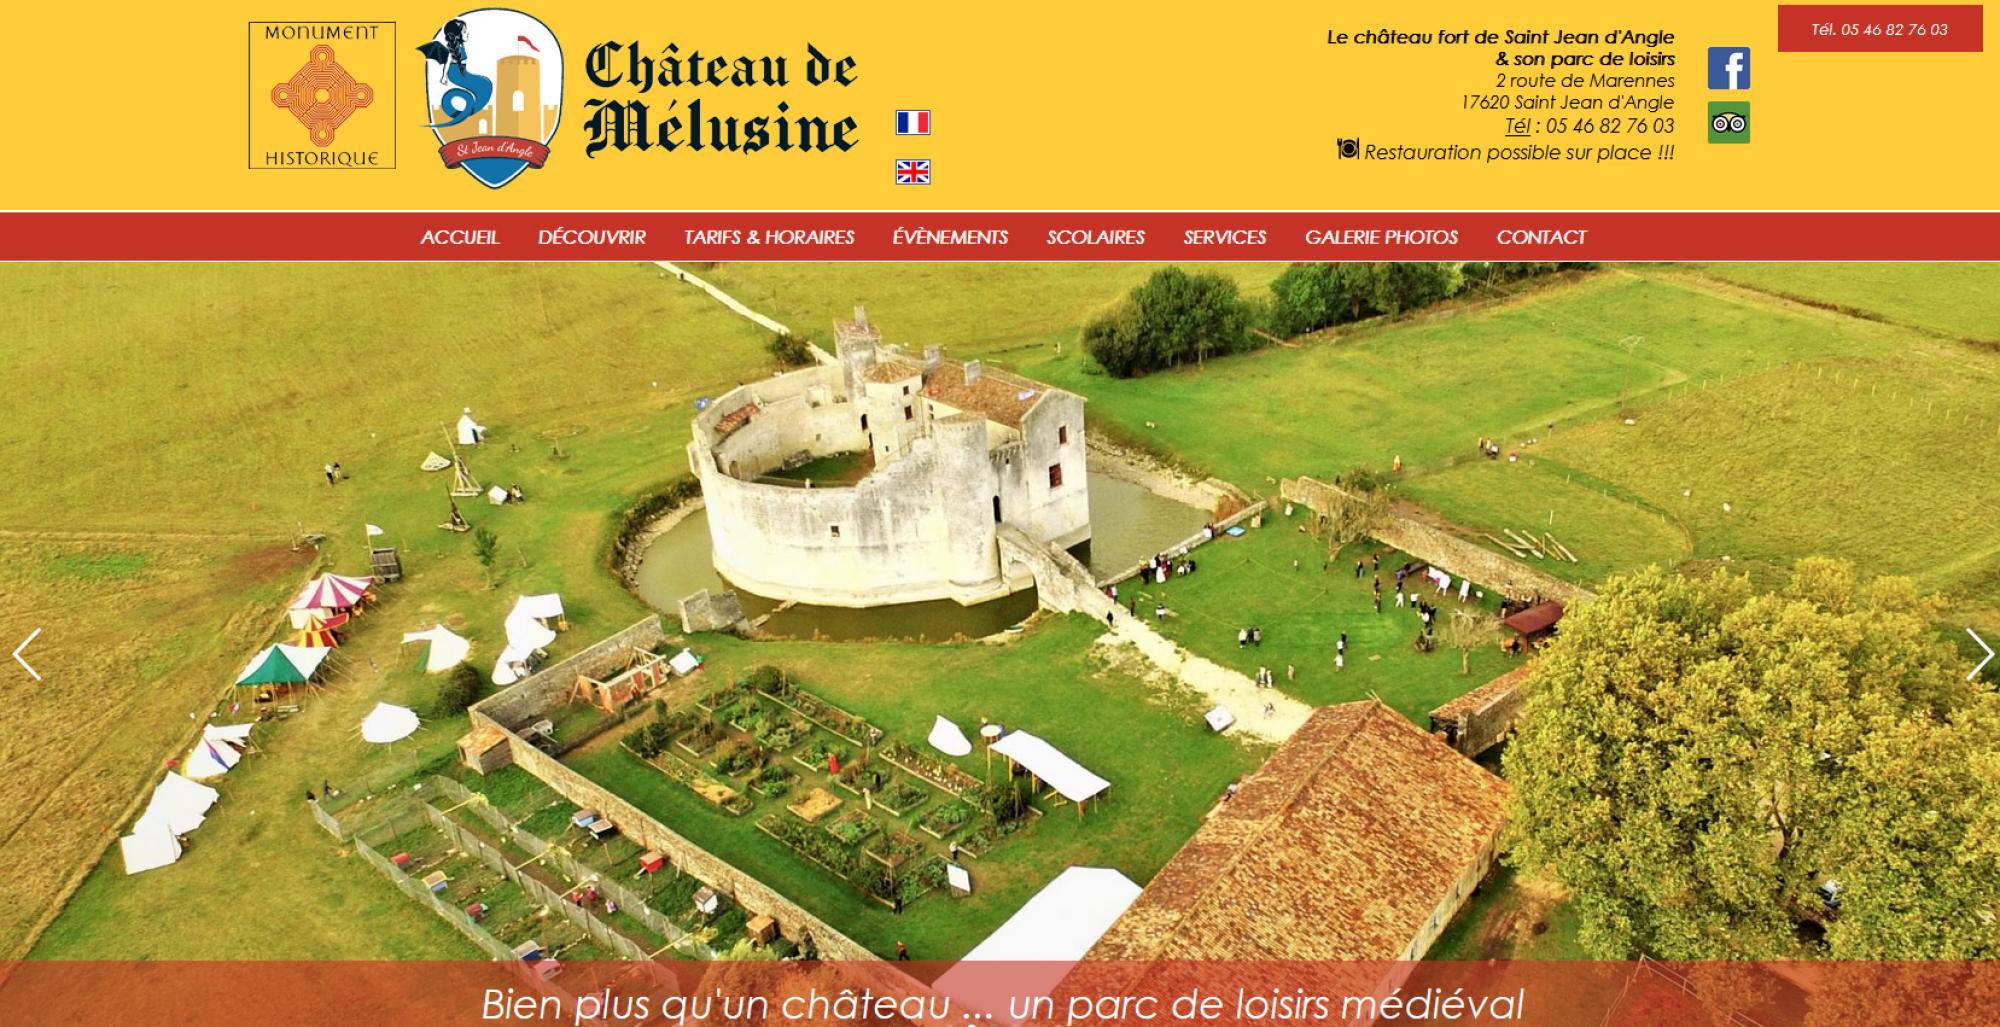 Castle of the fairy Mélusine and its medieval leisure park in Saint Jean d'Angle